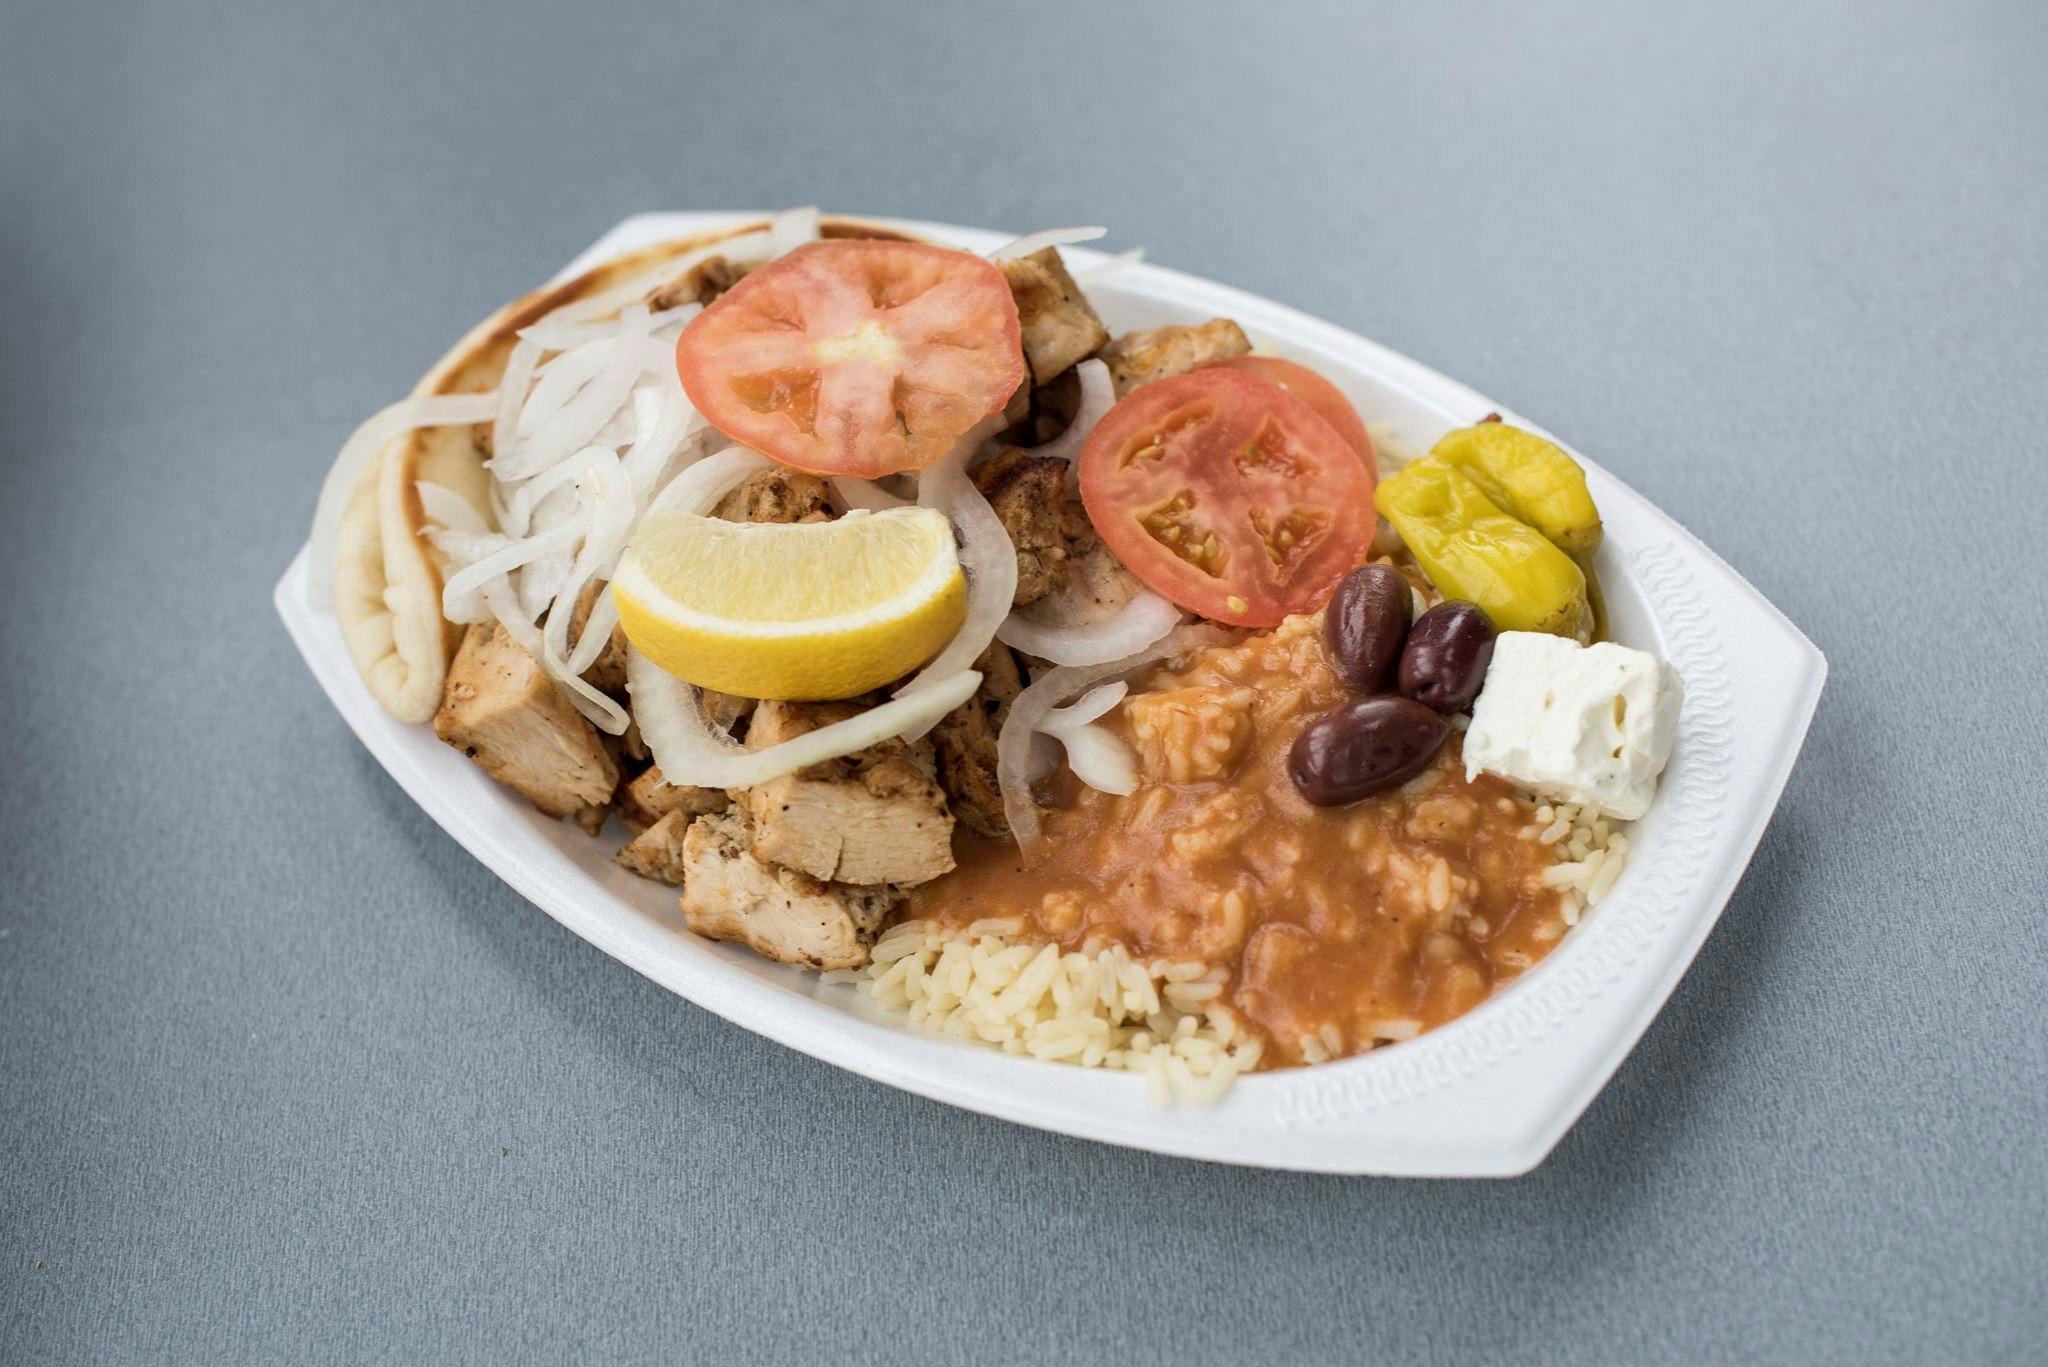 Chicken Shish Kabob Plate from Gyro Palace - Glendale in Glendale, WI